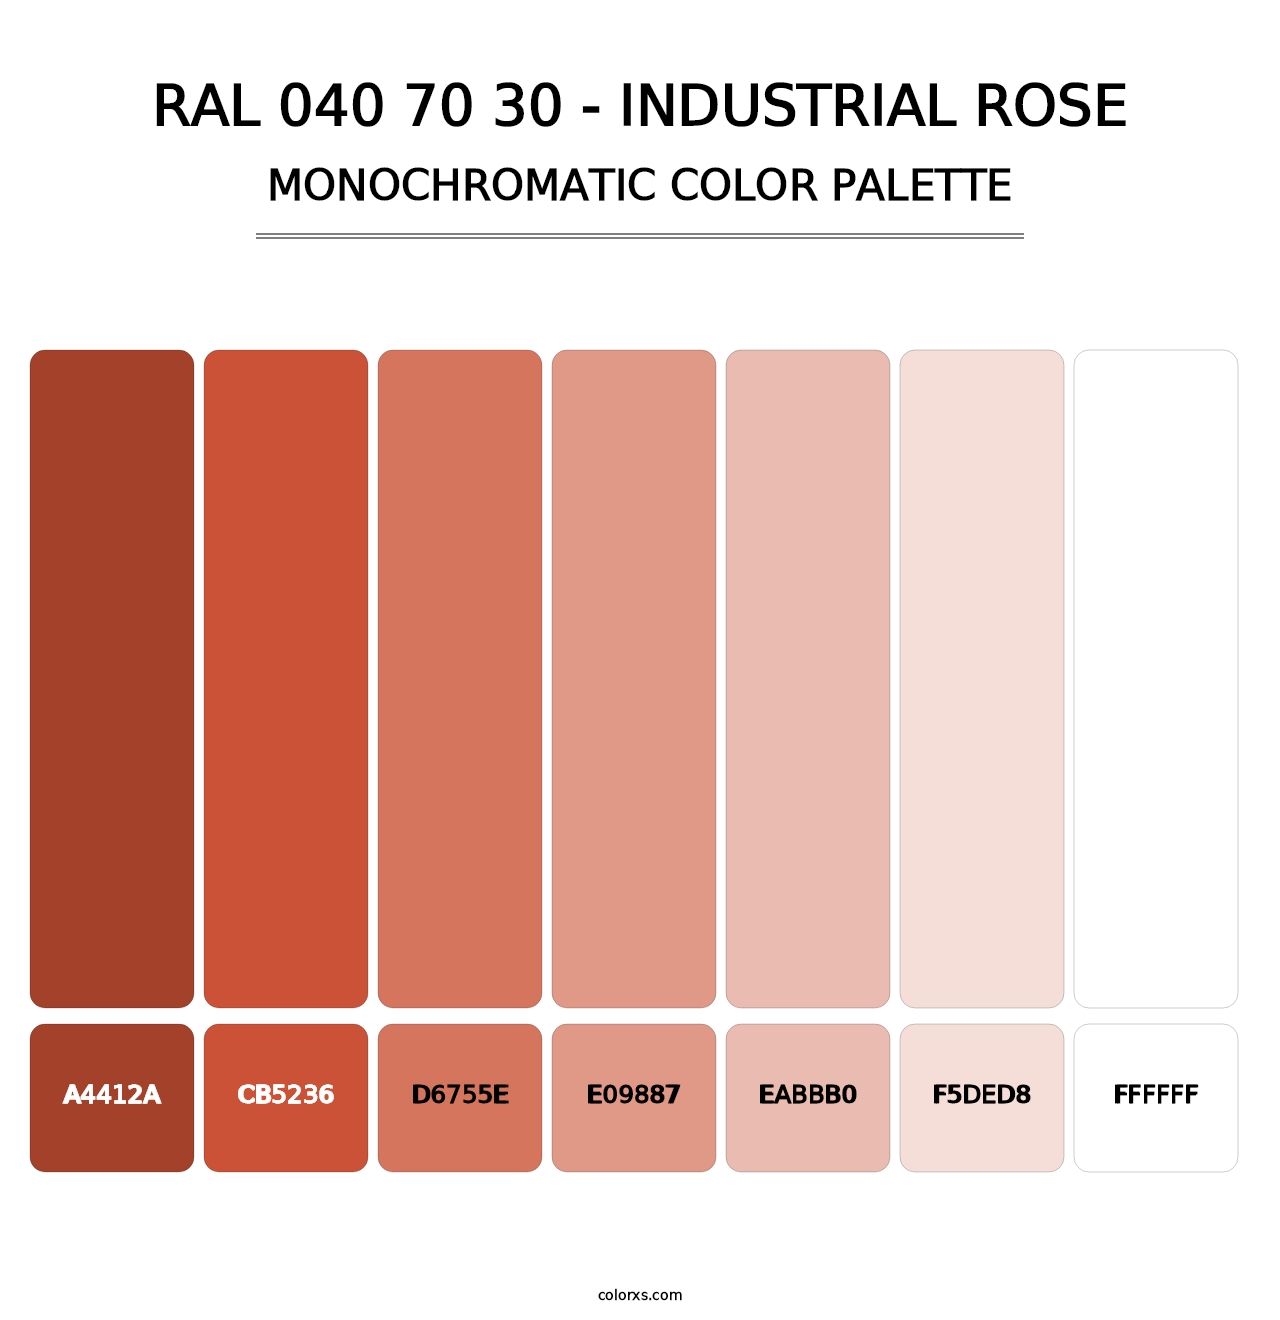 RAL 040 70 30 - Industrial Rose - Monochromatic Color Palette